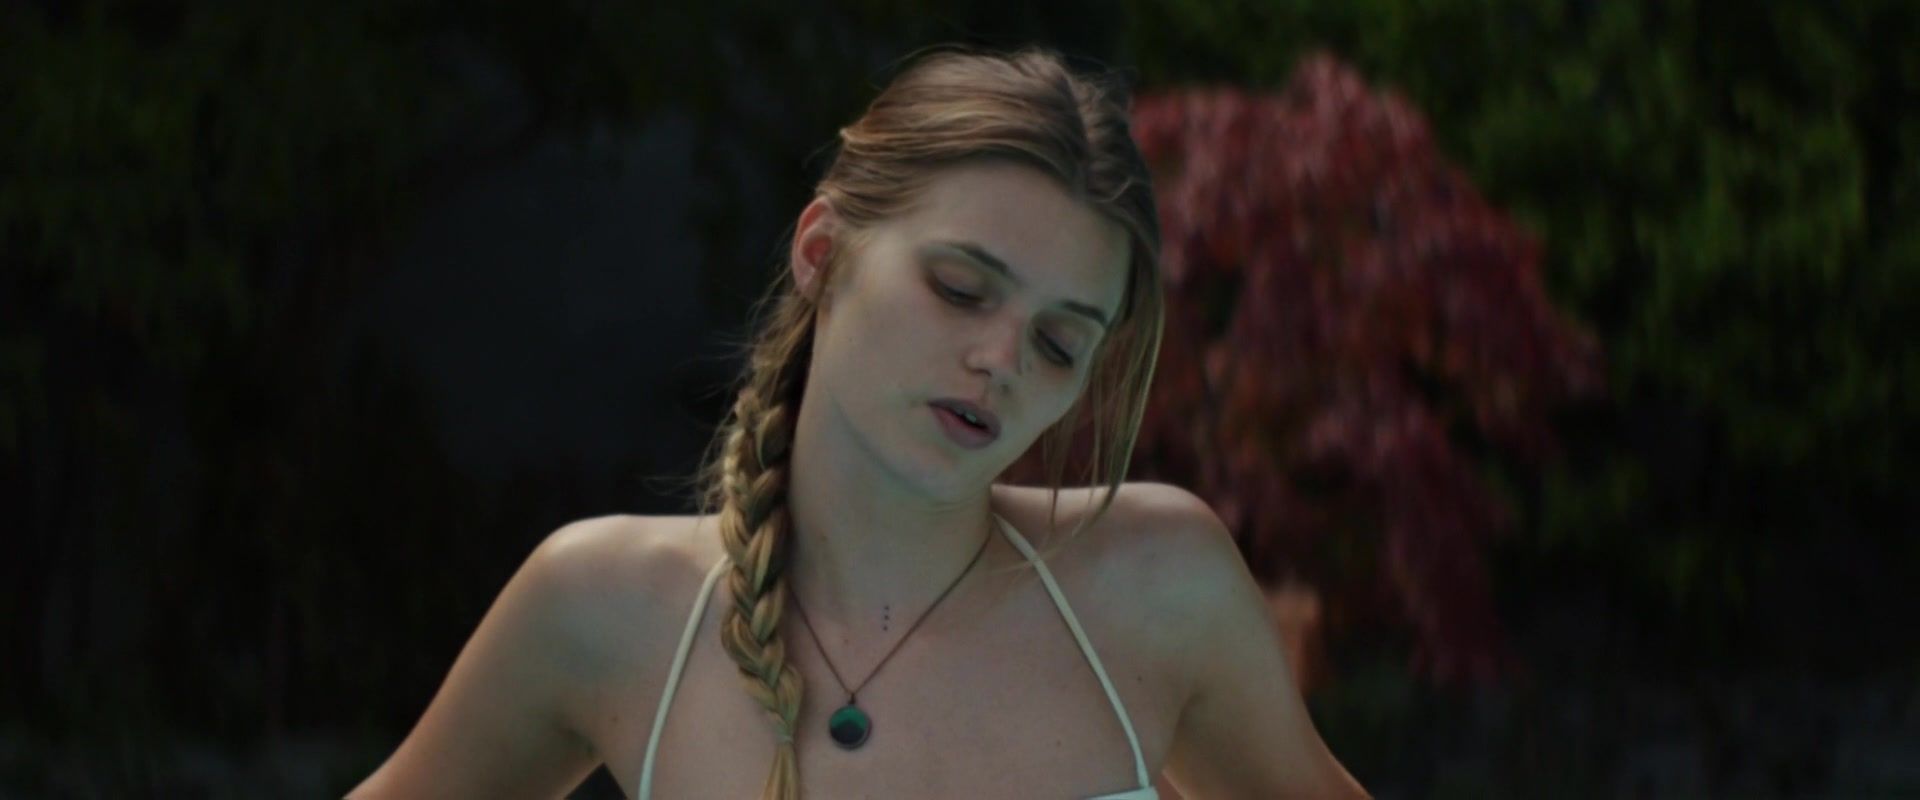 Lesbians Abbey Lee, Riley Keough nude - Welcome The Stranger (2018) Outdoor - 2